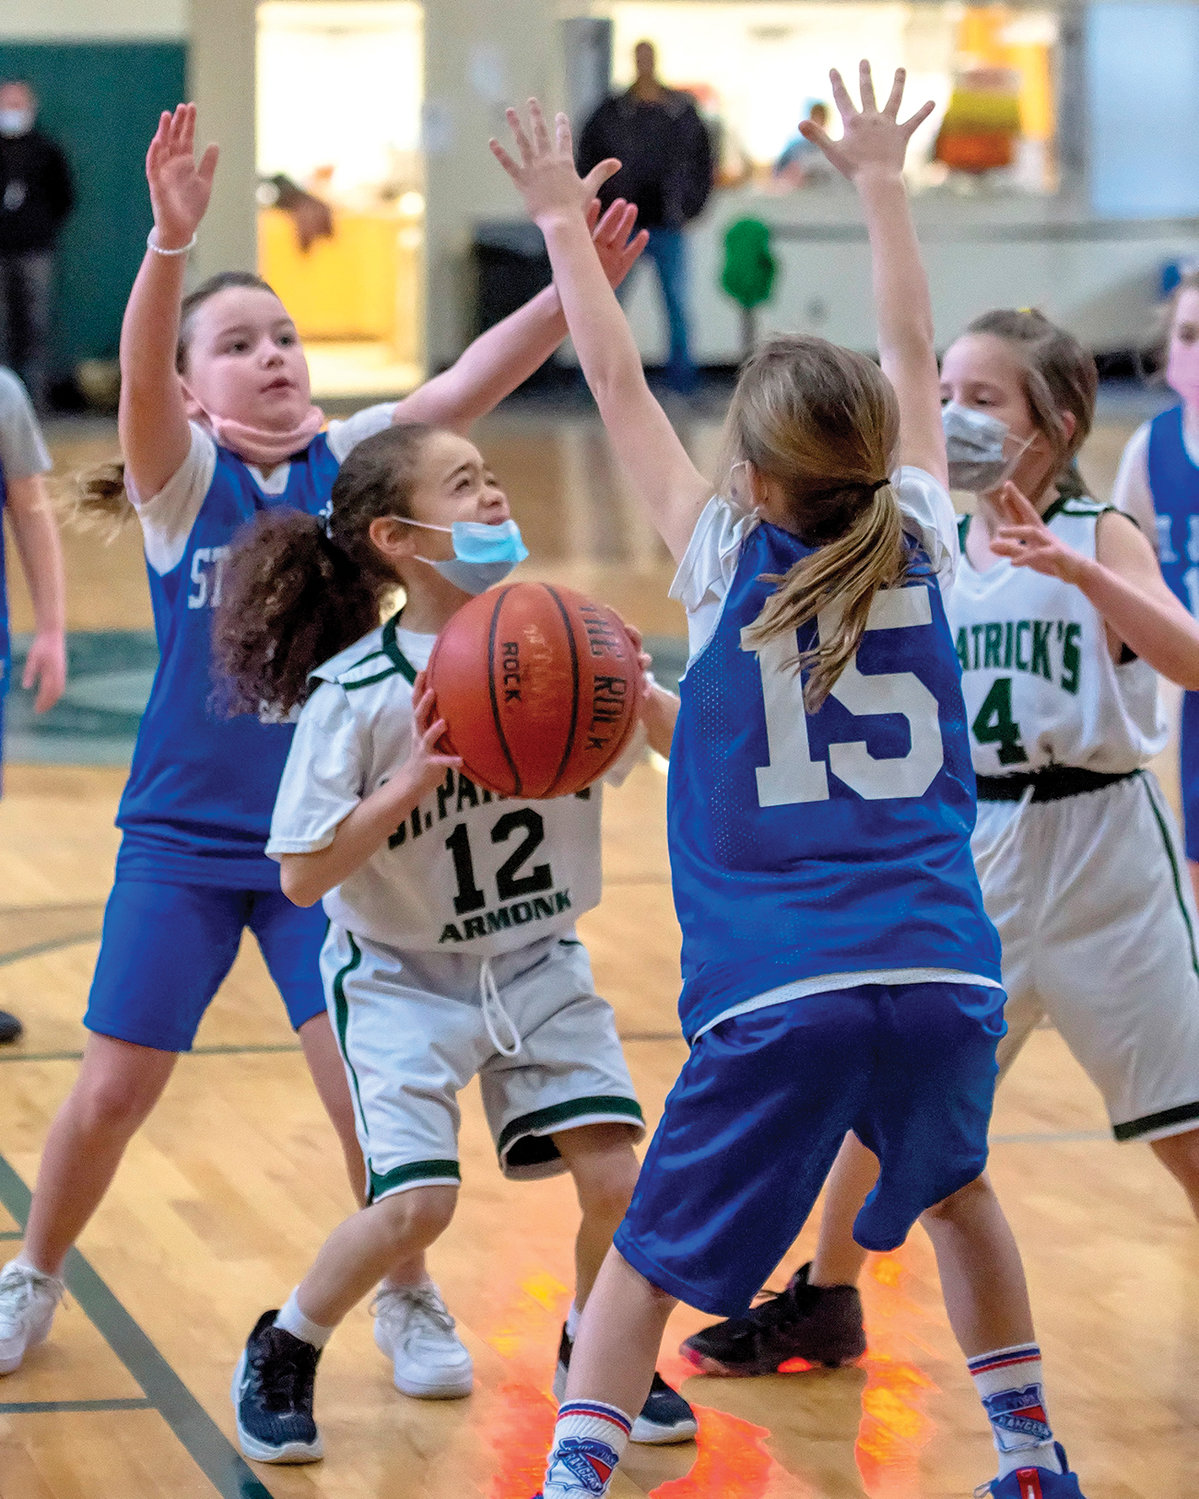 St. Patrick’s Olivia Moncion is defended by Scarlett Macnaughton of St. Joseph’s of Bronxville in a CYO third-grade girls game won by St. Joseph’s, 8-4.